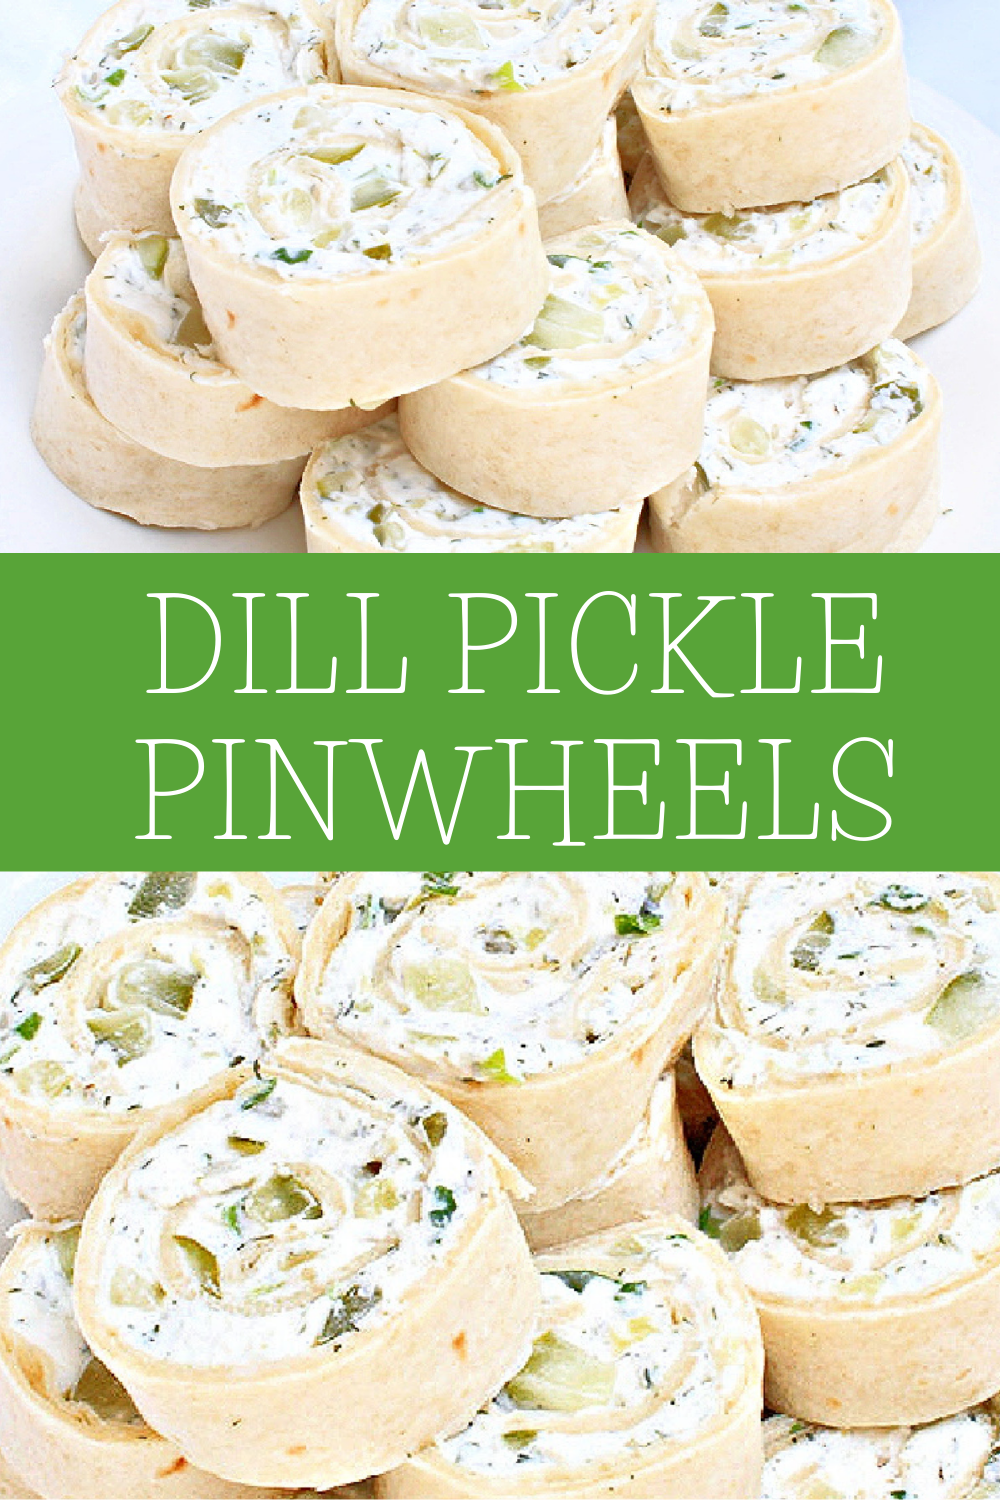 Dill Pickle Pinwheels ~ A classic party food perfect for all types of gatherings! 6 simple ingredients and 20 minutes are all you need! via @thiswifecooks